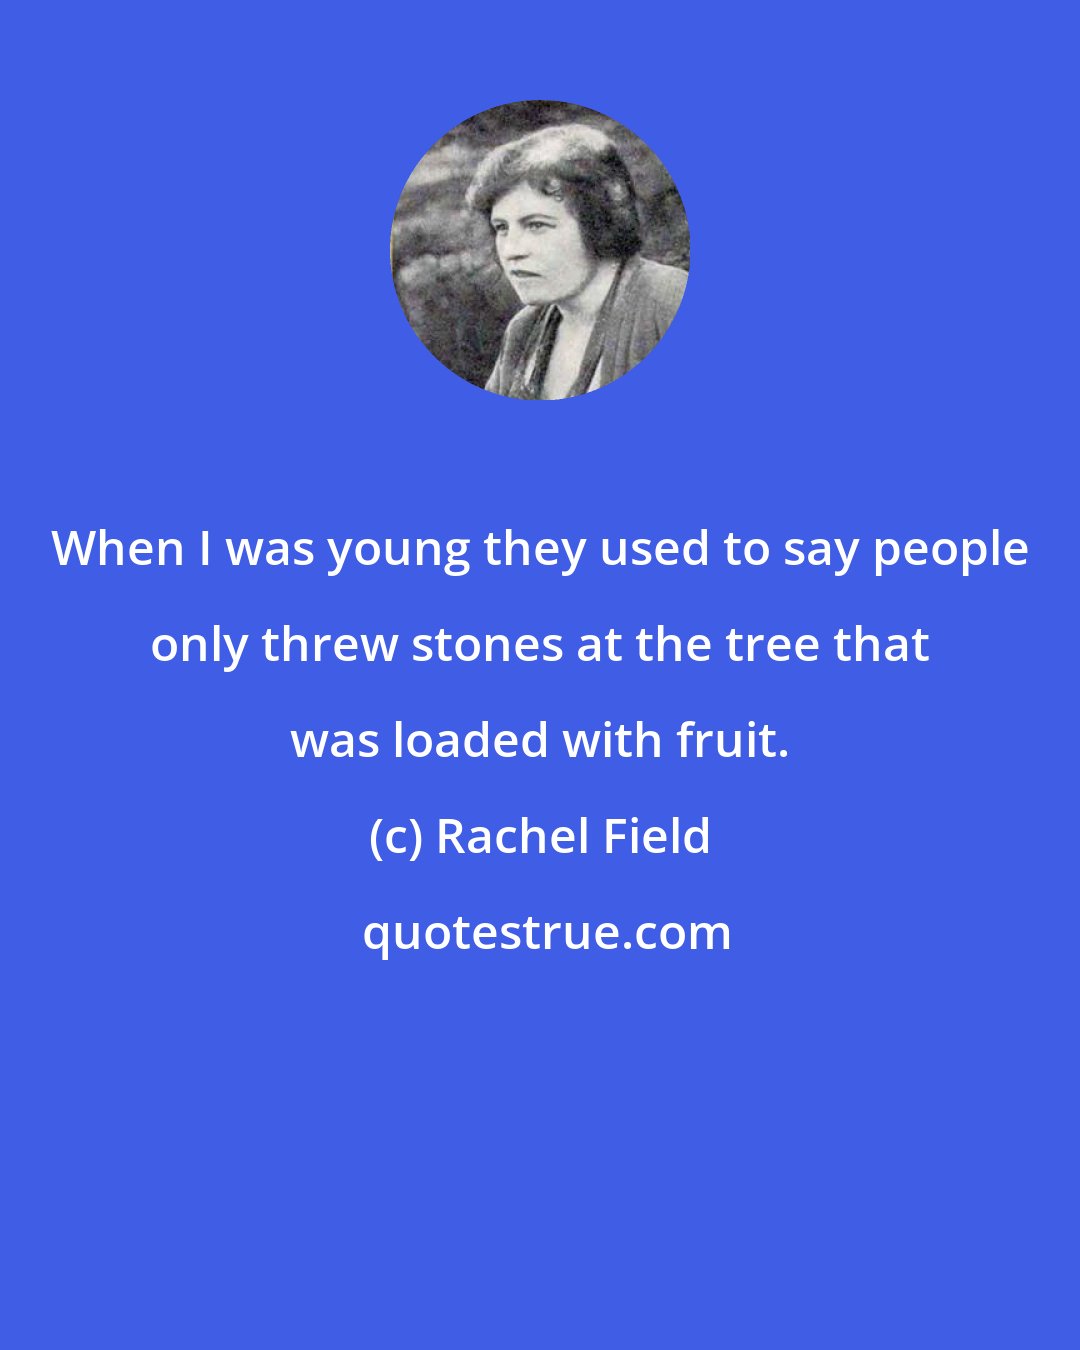 Rachel Field: When I was young they used to say people only threw stones at the tree that was loaded with fruit.